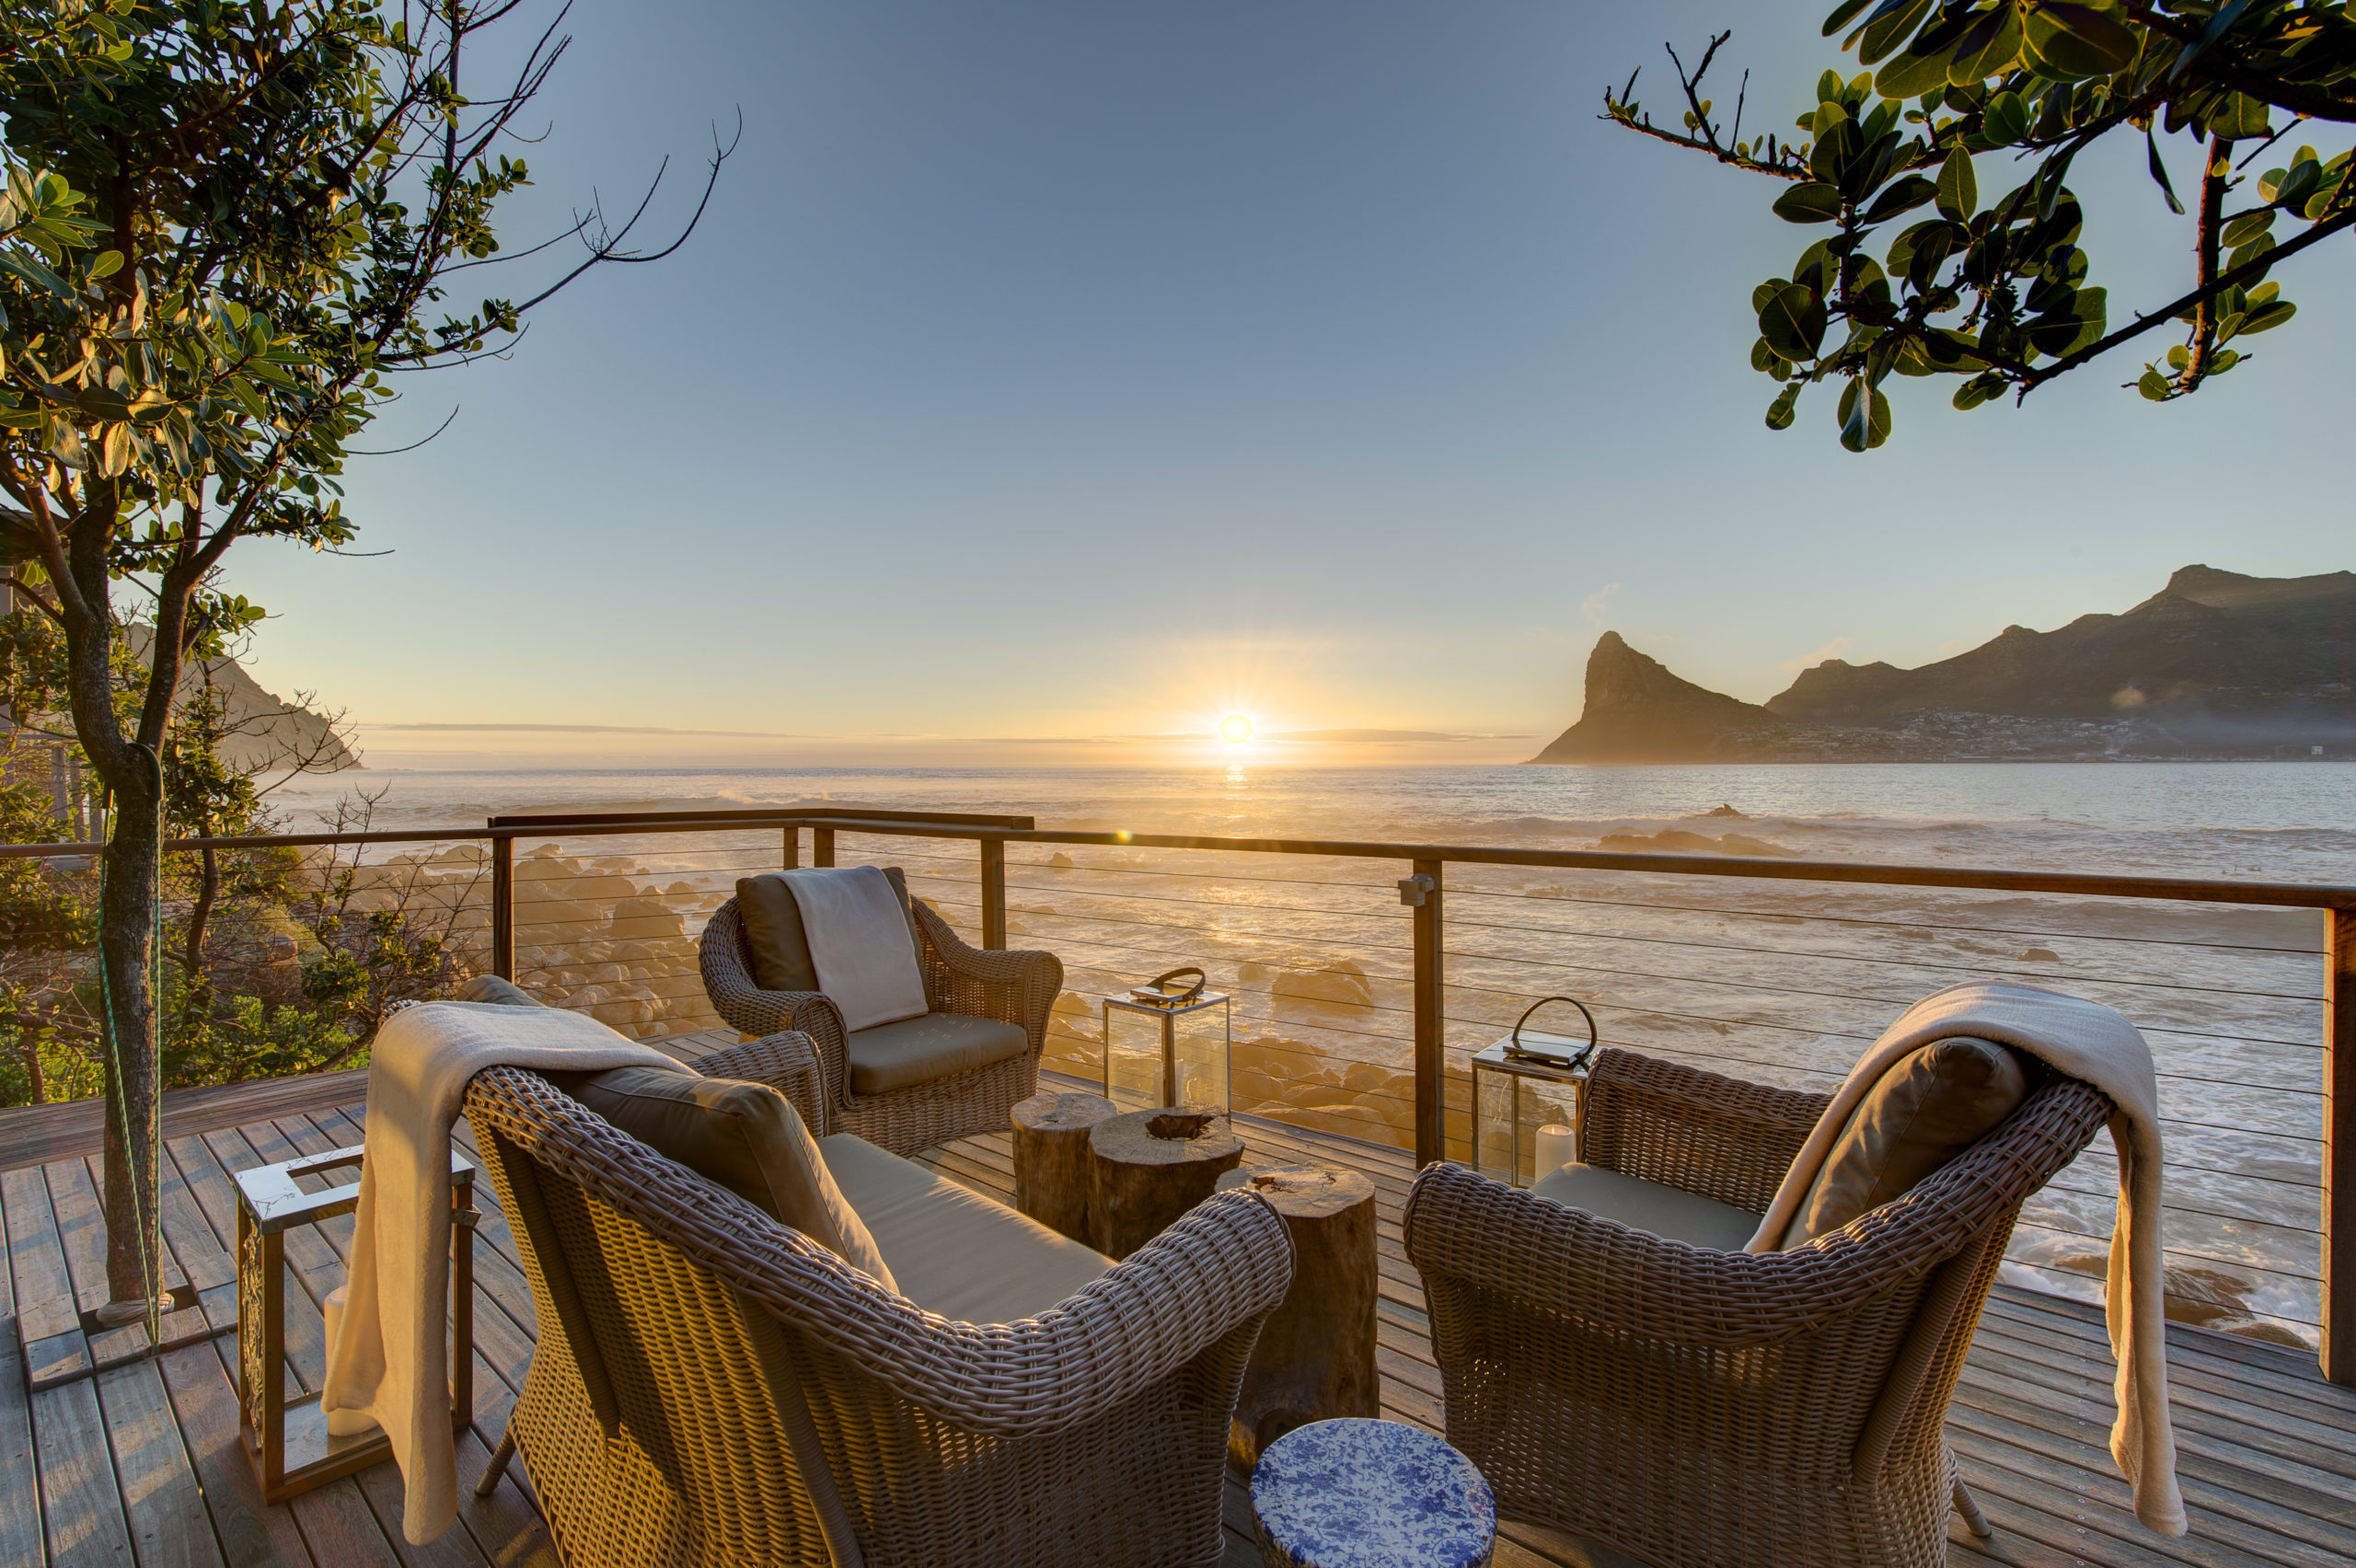 Tintswalo Extends 50% Discount Staycation Deals for South Africans!